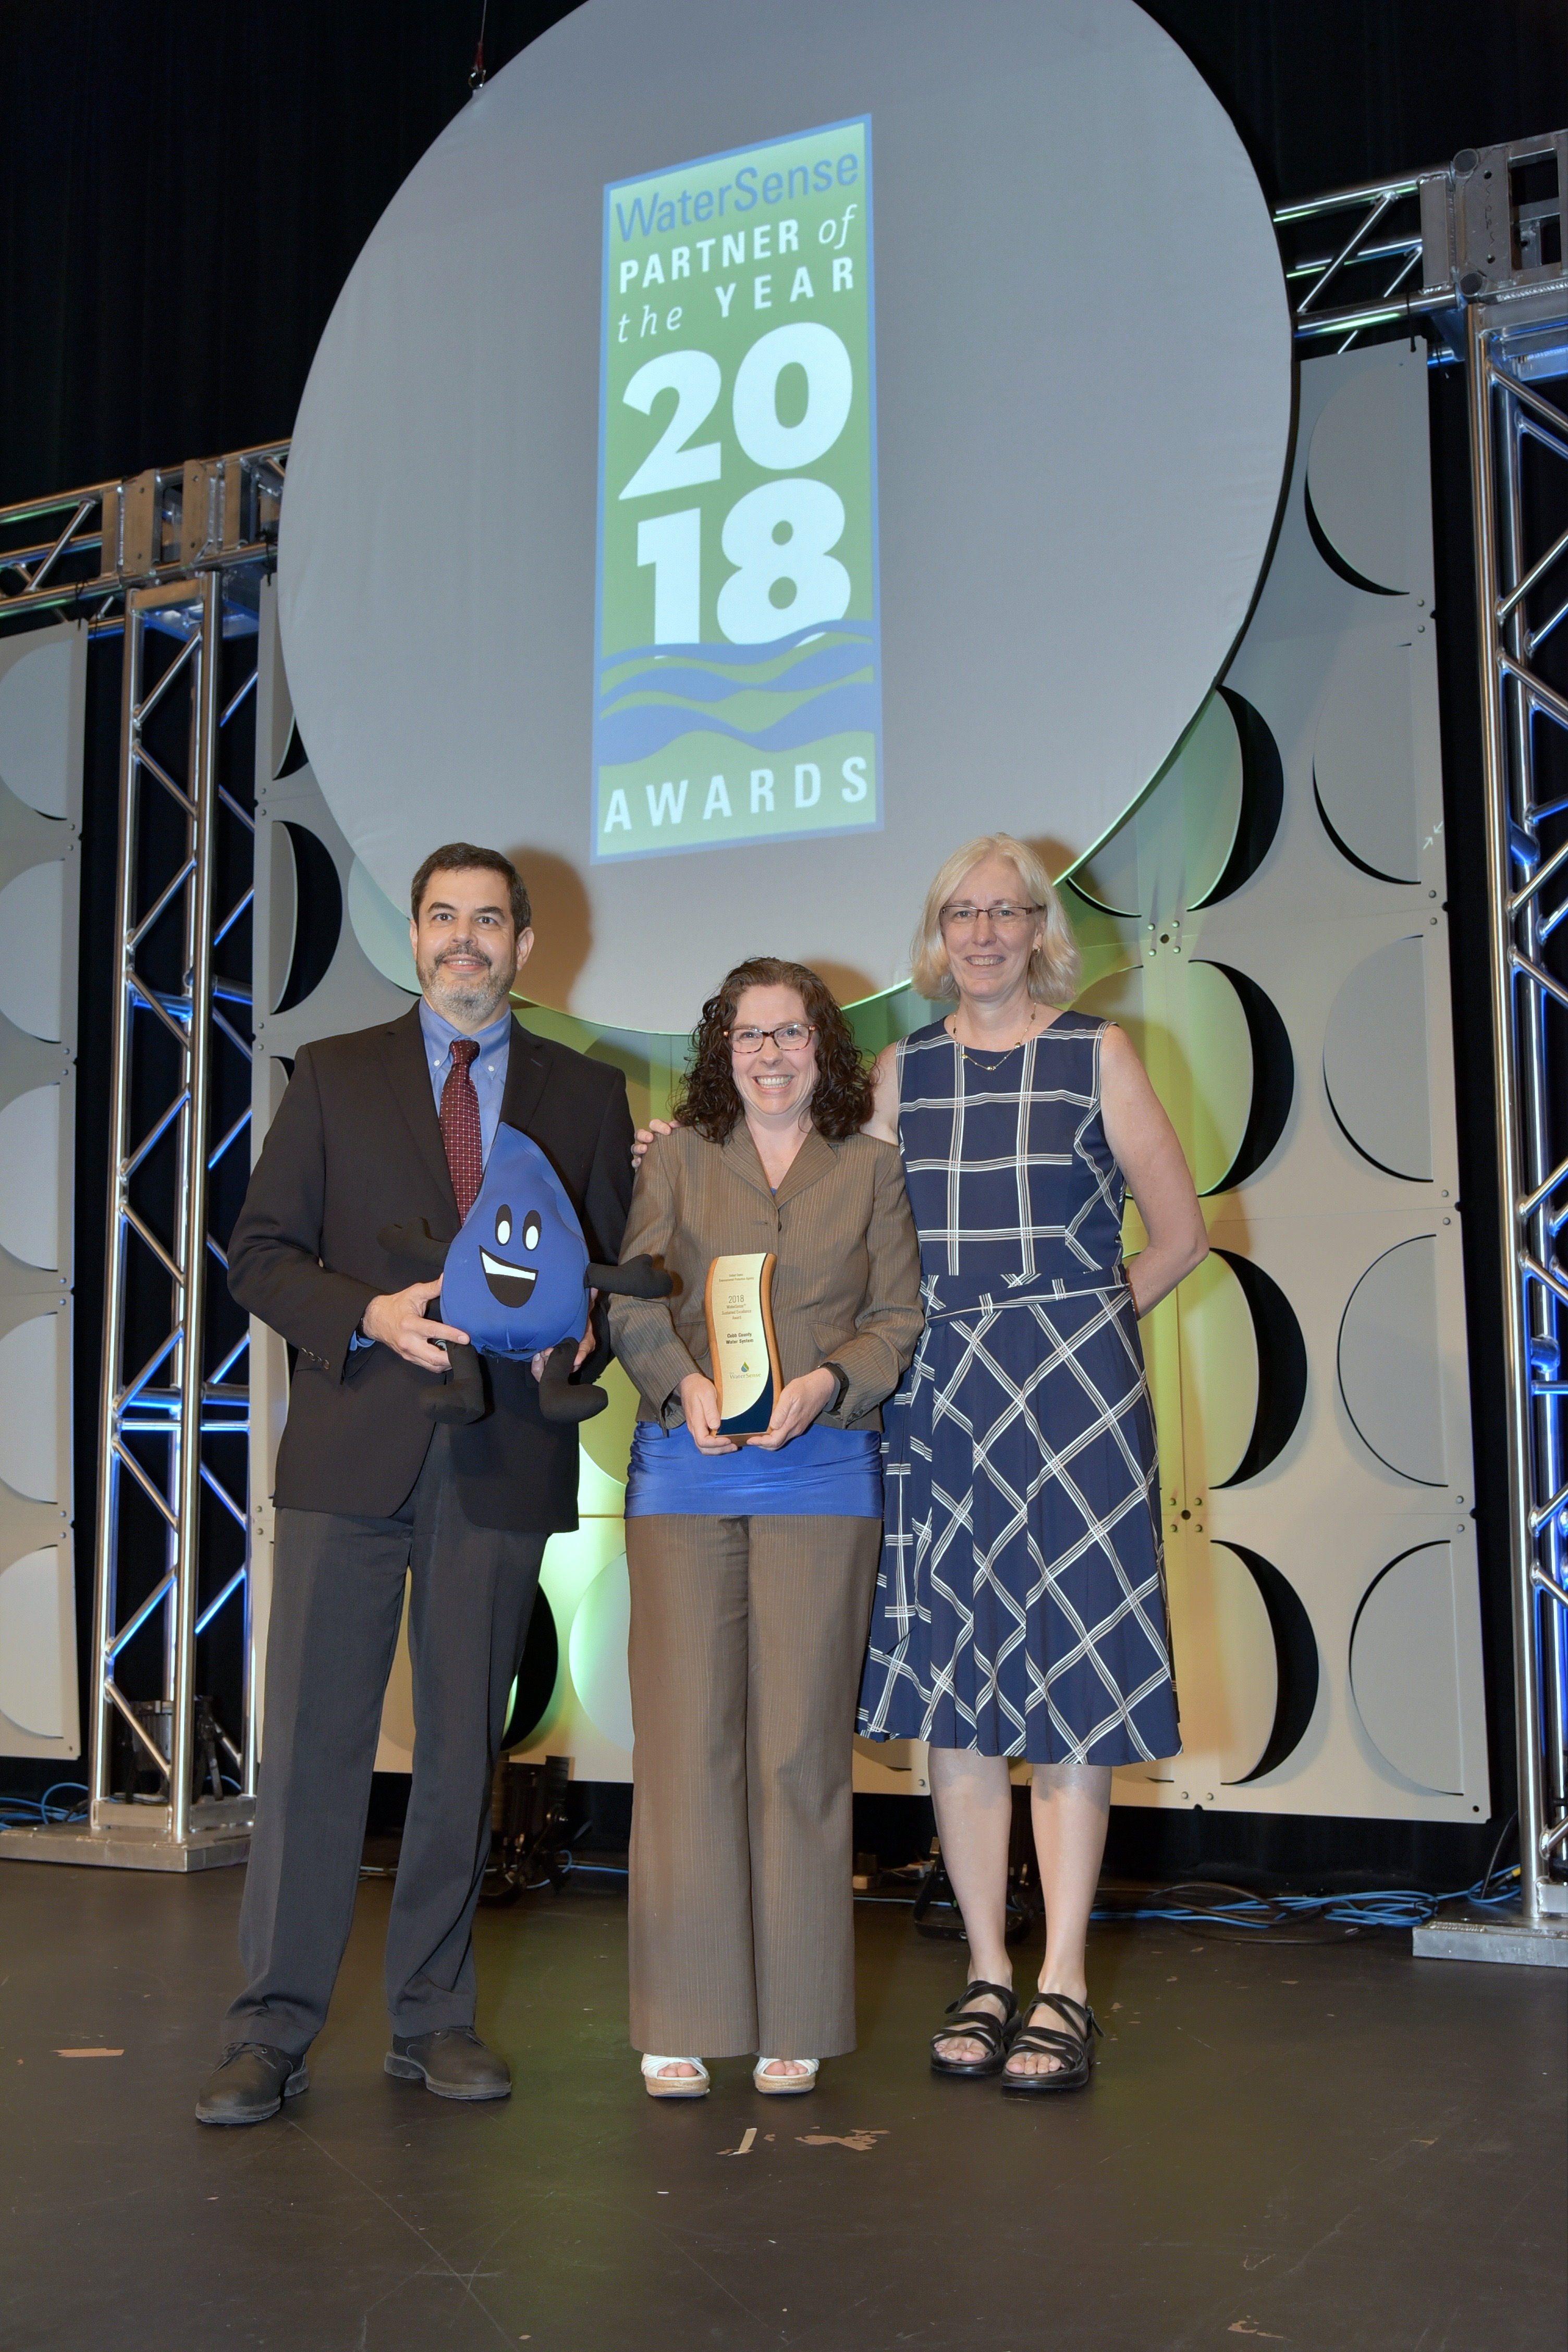 Sustained Excellence Award winner, Cobb County Water System, with U.S. EPA's Raffael Stein and Veronica Blette.